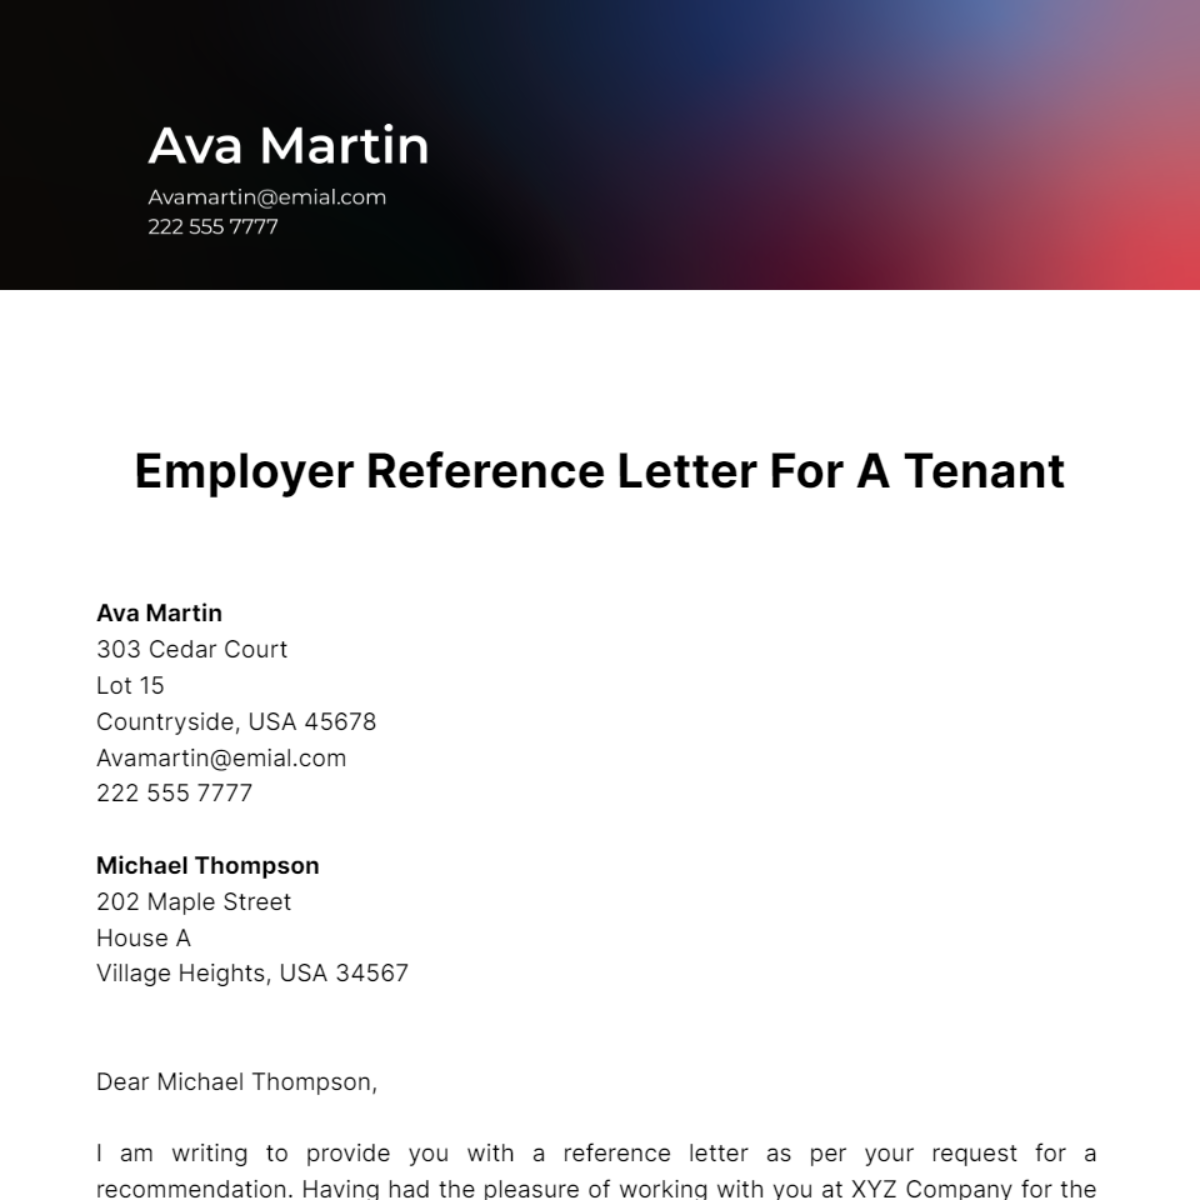 Employer Reference Letter For A Tenant Template